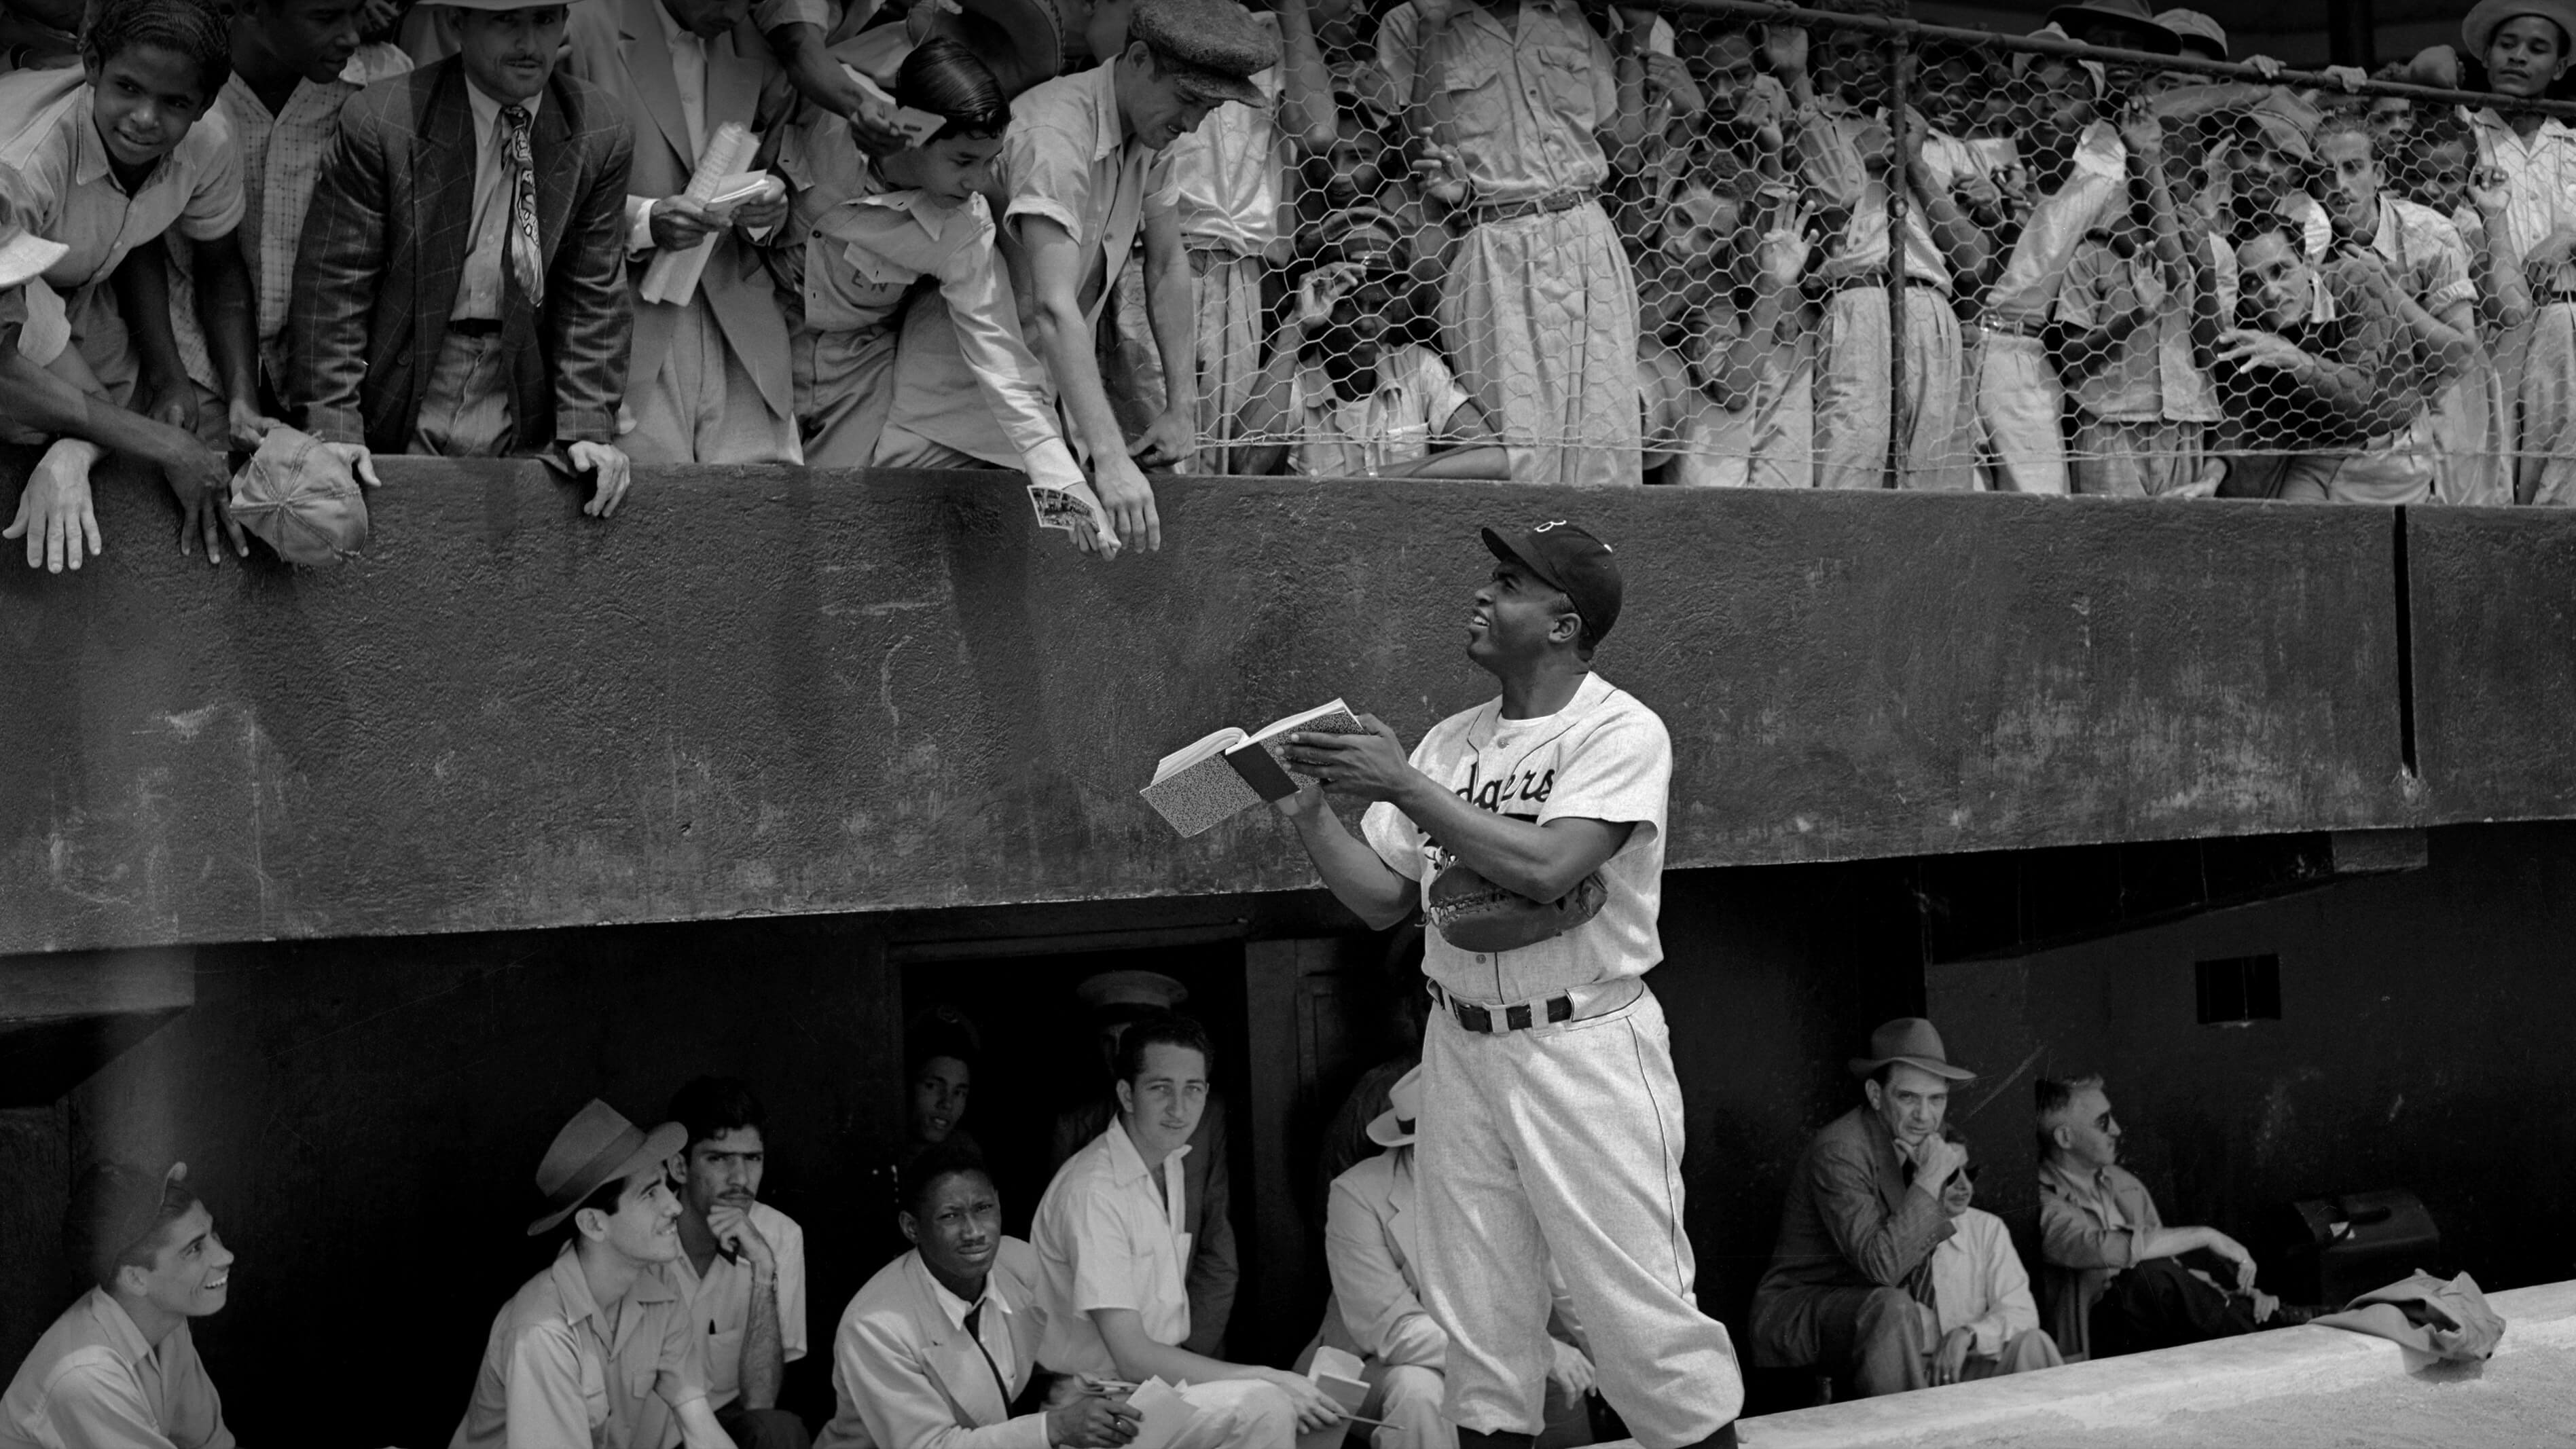 Wallpaper  people portrait celebrity emotion Person head child bw  smile man photograph male black and white monochrome photography jackie  robinson 2378x1338  wallup  575155  HD Wallpapers  WallHere